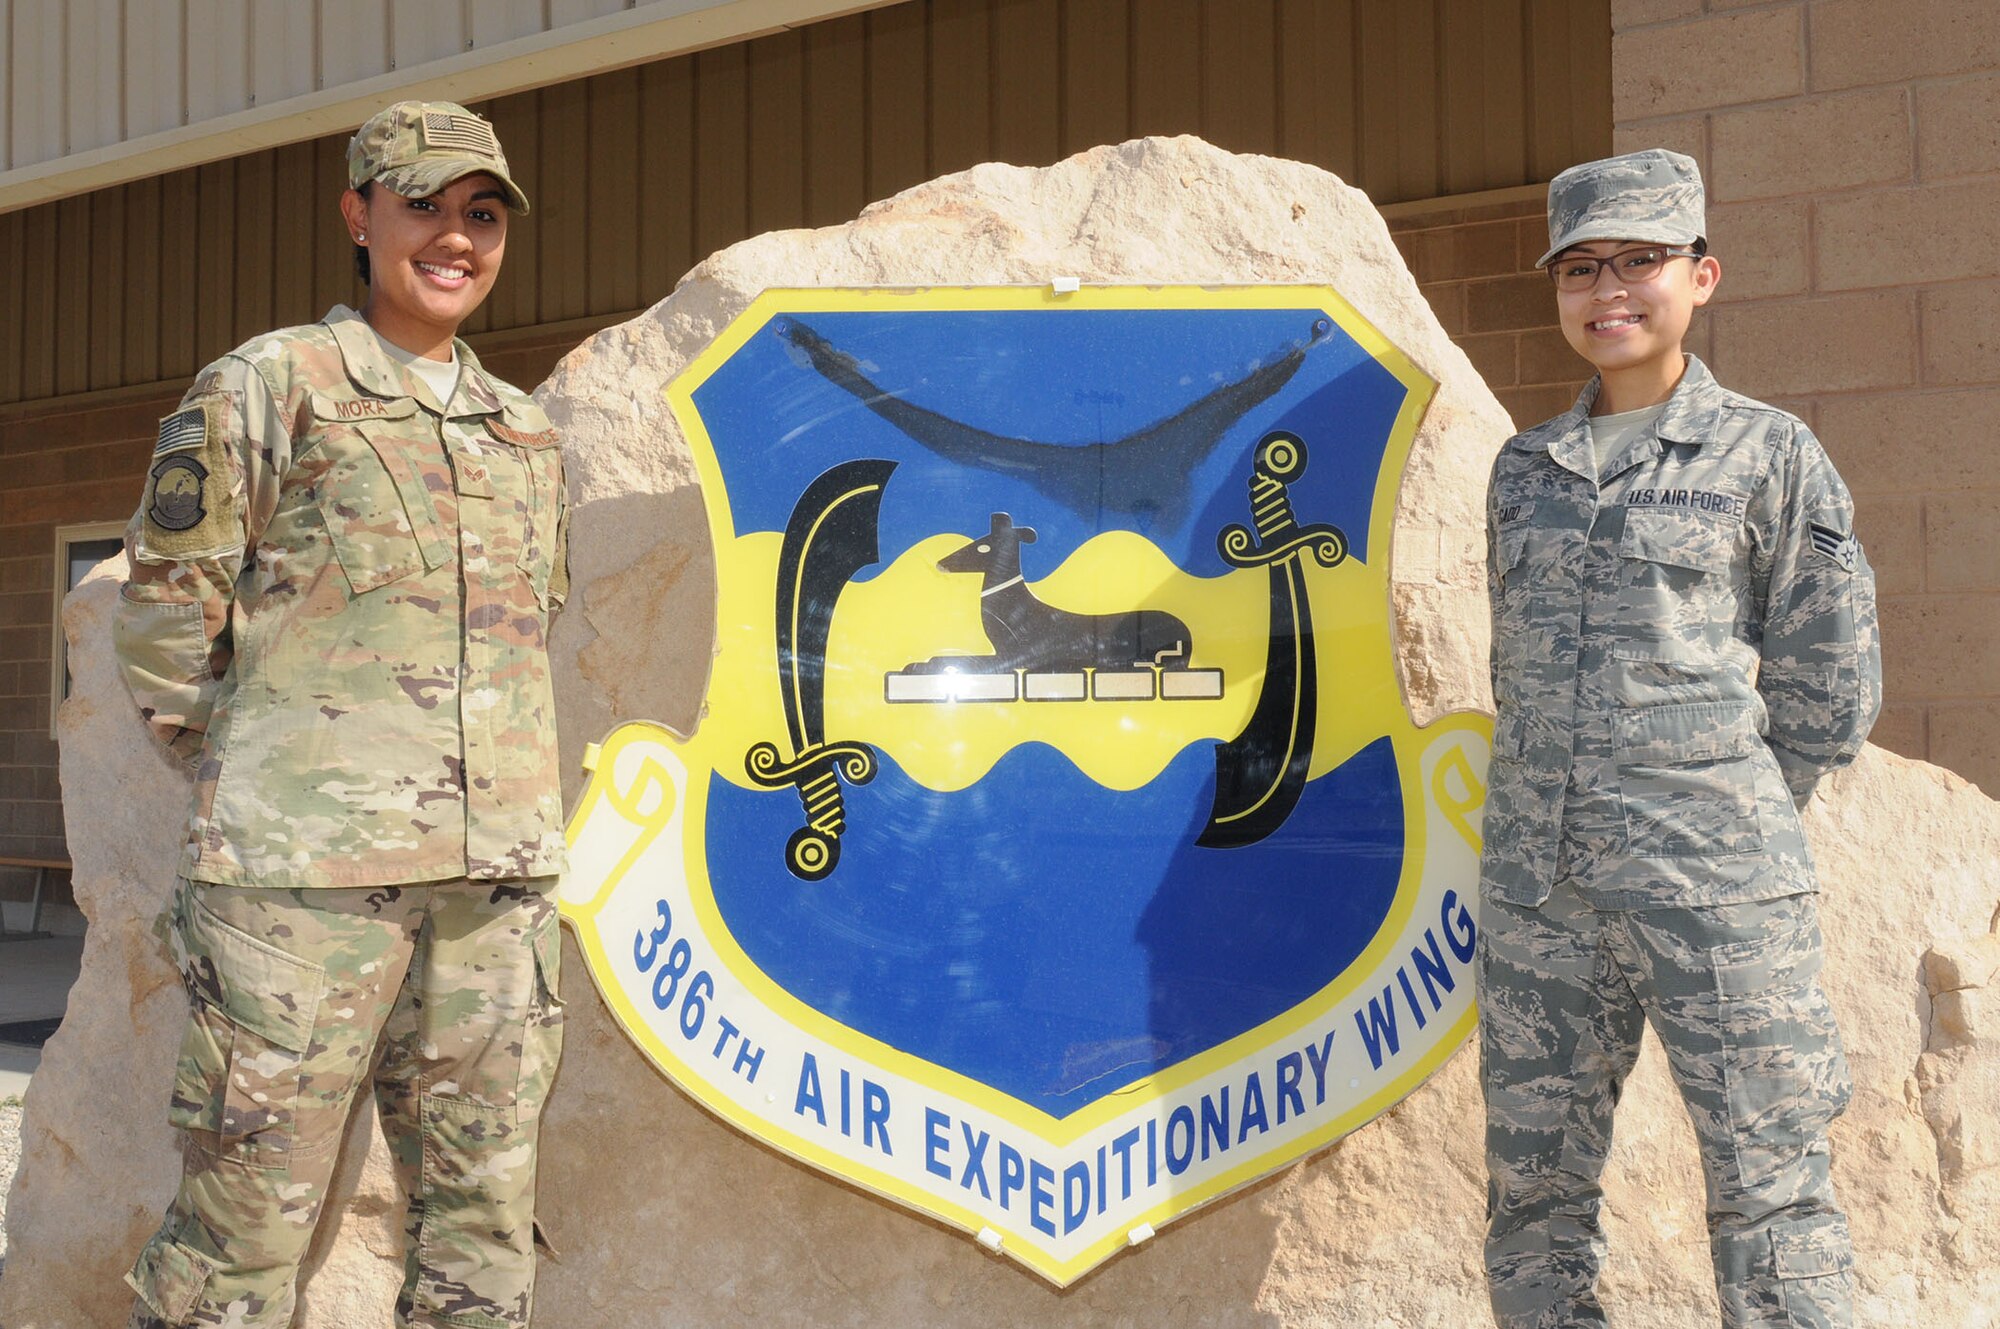 Mora and Delgado are step-sisters deployed from the 944th Fighter Wing, Luke Air Force Base, Arizona, and have consistently been linked together throughout their lives and currently find themselves together again, at an undisclosed location in Southwest Asia.